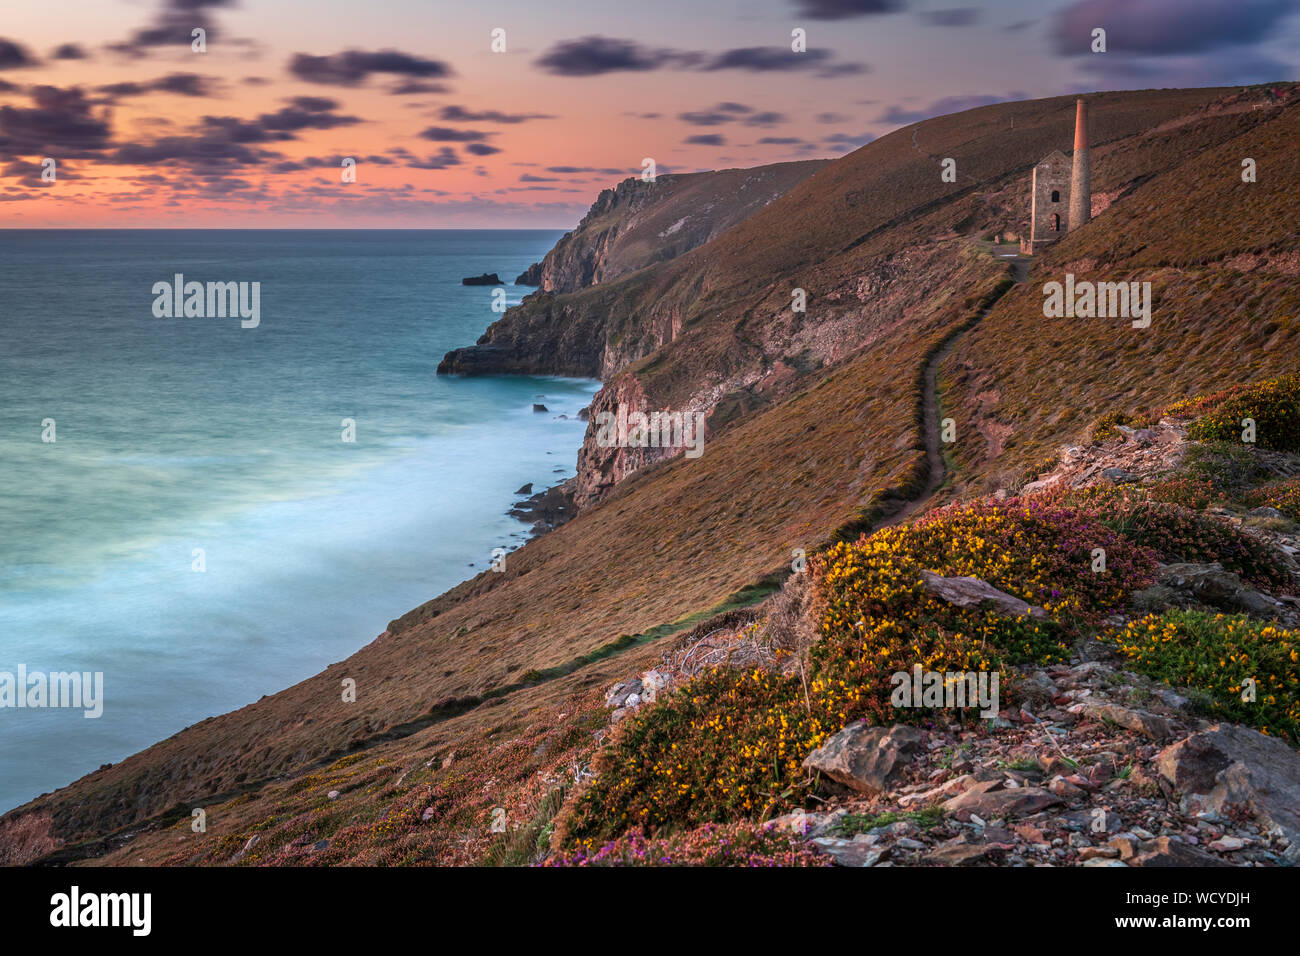 Towanroath Shaft, Wheal Coates, near St. Agnes in North Cornwall, England. Wednesday 28th August 2019. UK Weather. After a spell of hot and settled weather including the hottest Bank Holiday on record, Wednesday sees a change to wet and unsettled conditions in Cornwall. In late afternoon the clouds finally break up and the wind increases as the sun sets over at the Towanroath Shaft at Wheal Coates at St. Agnes Beacon. Credit: Terry Mathews/Alamy Live News Stock Photo